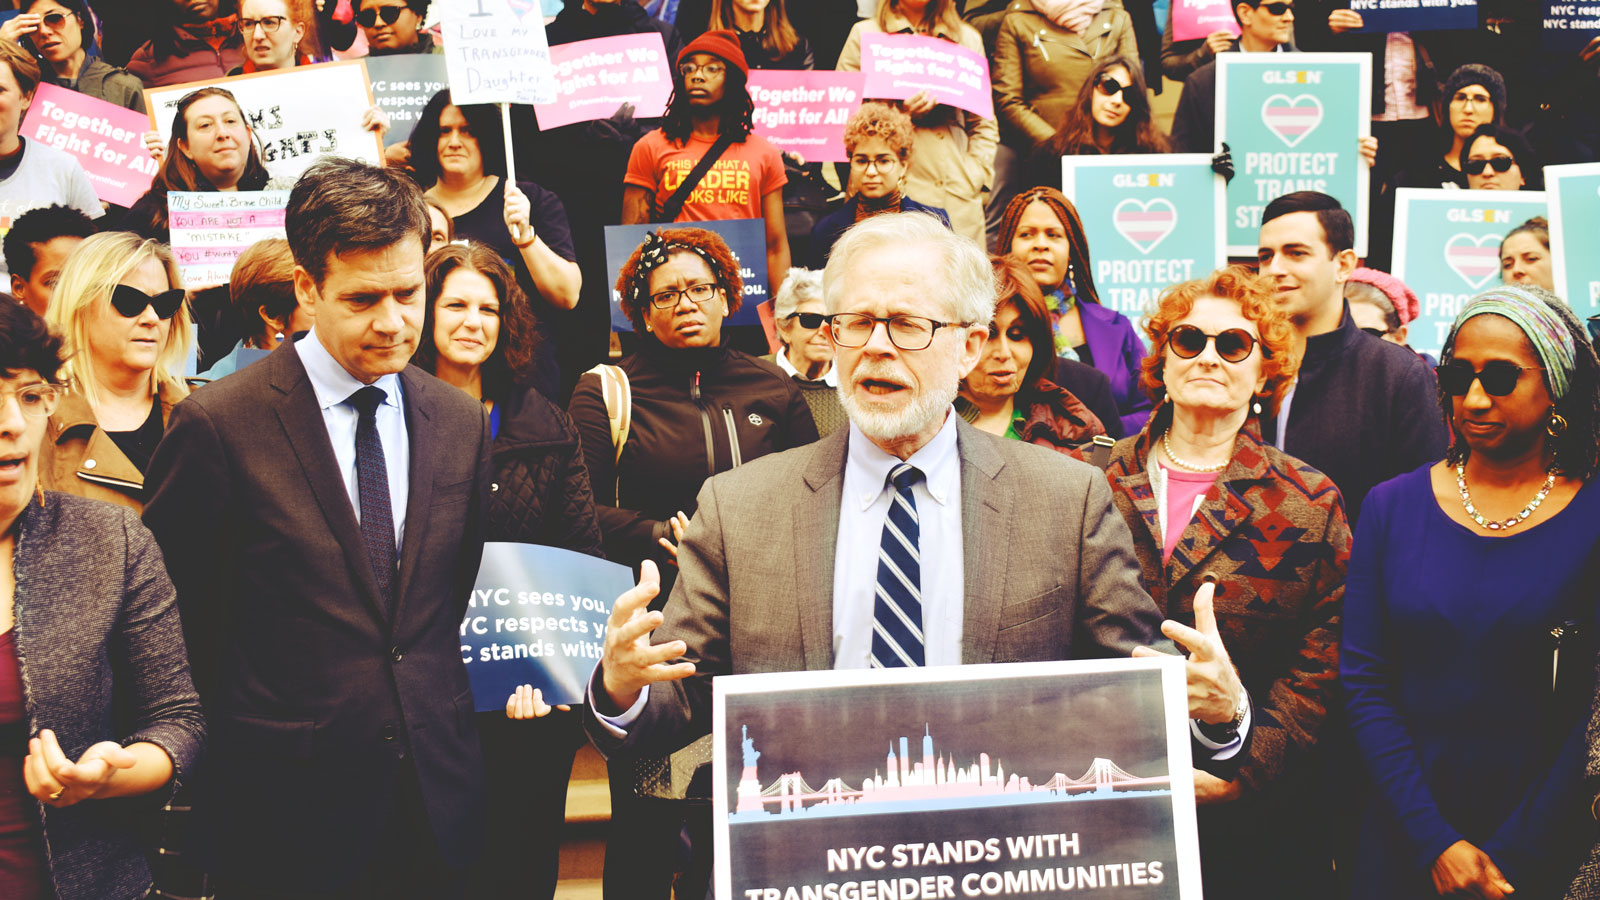 Assemblyman Richard Gottfried speaking at a rally for transgender rights